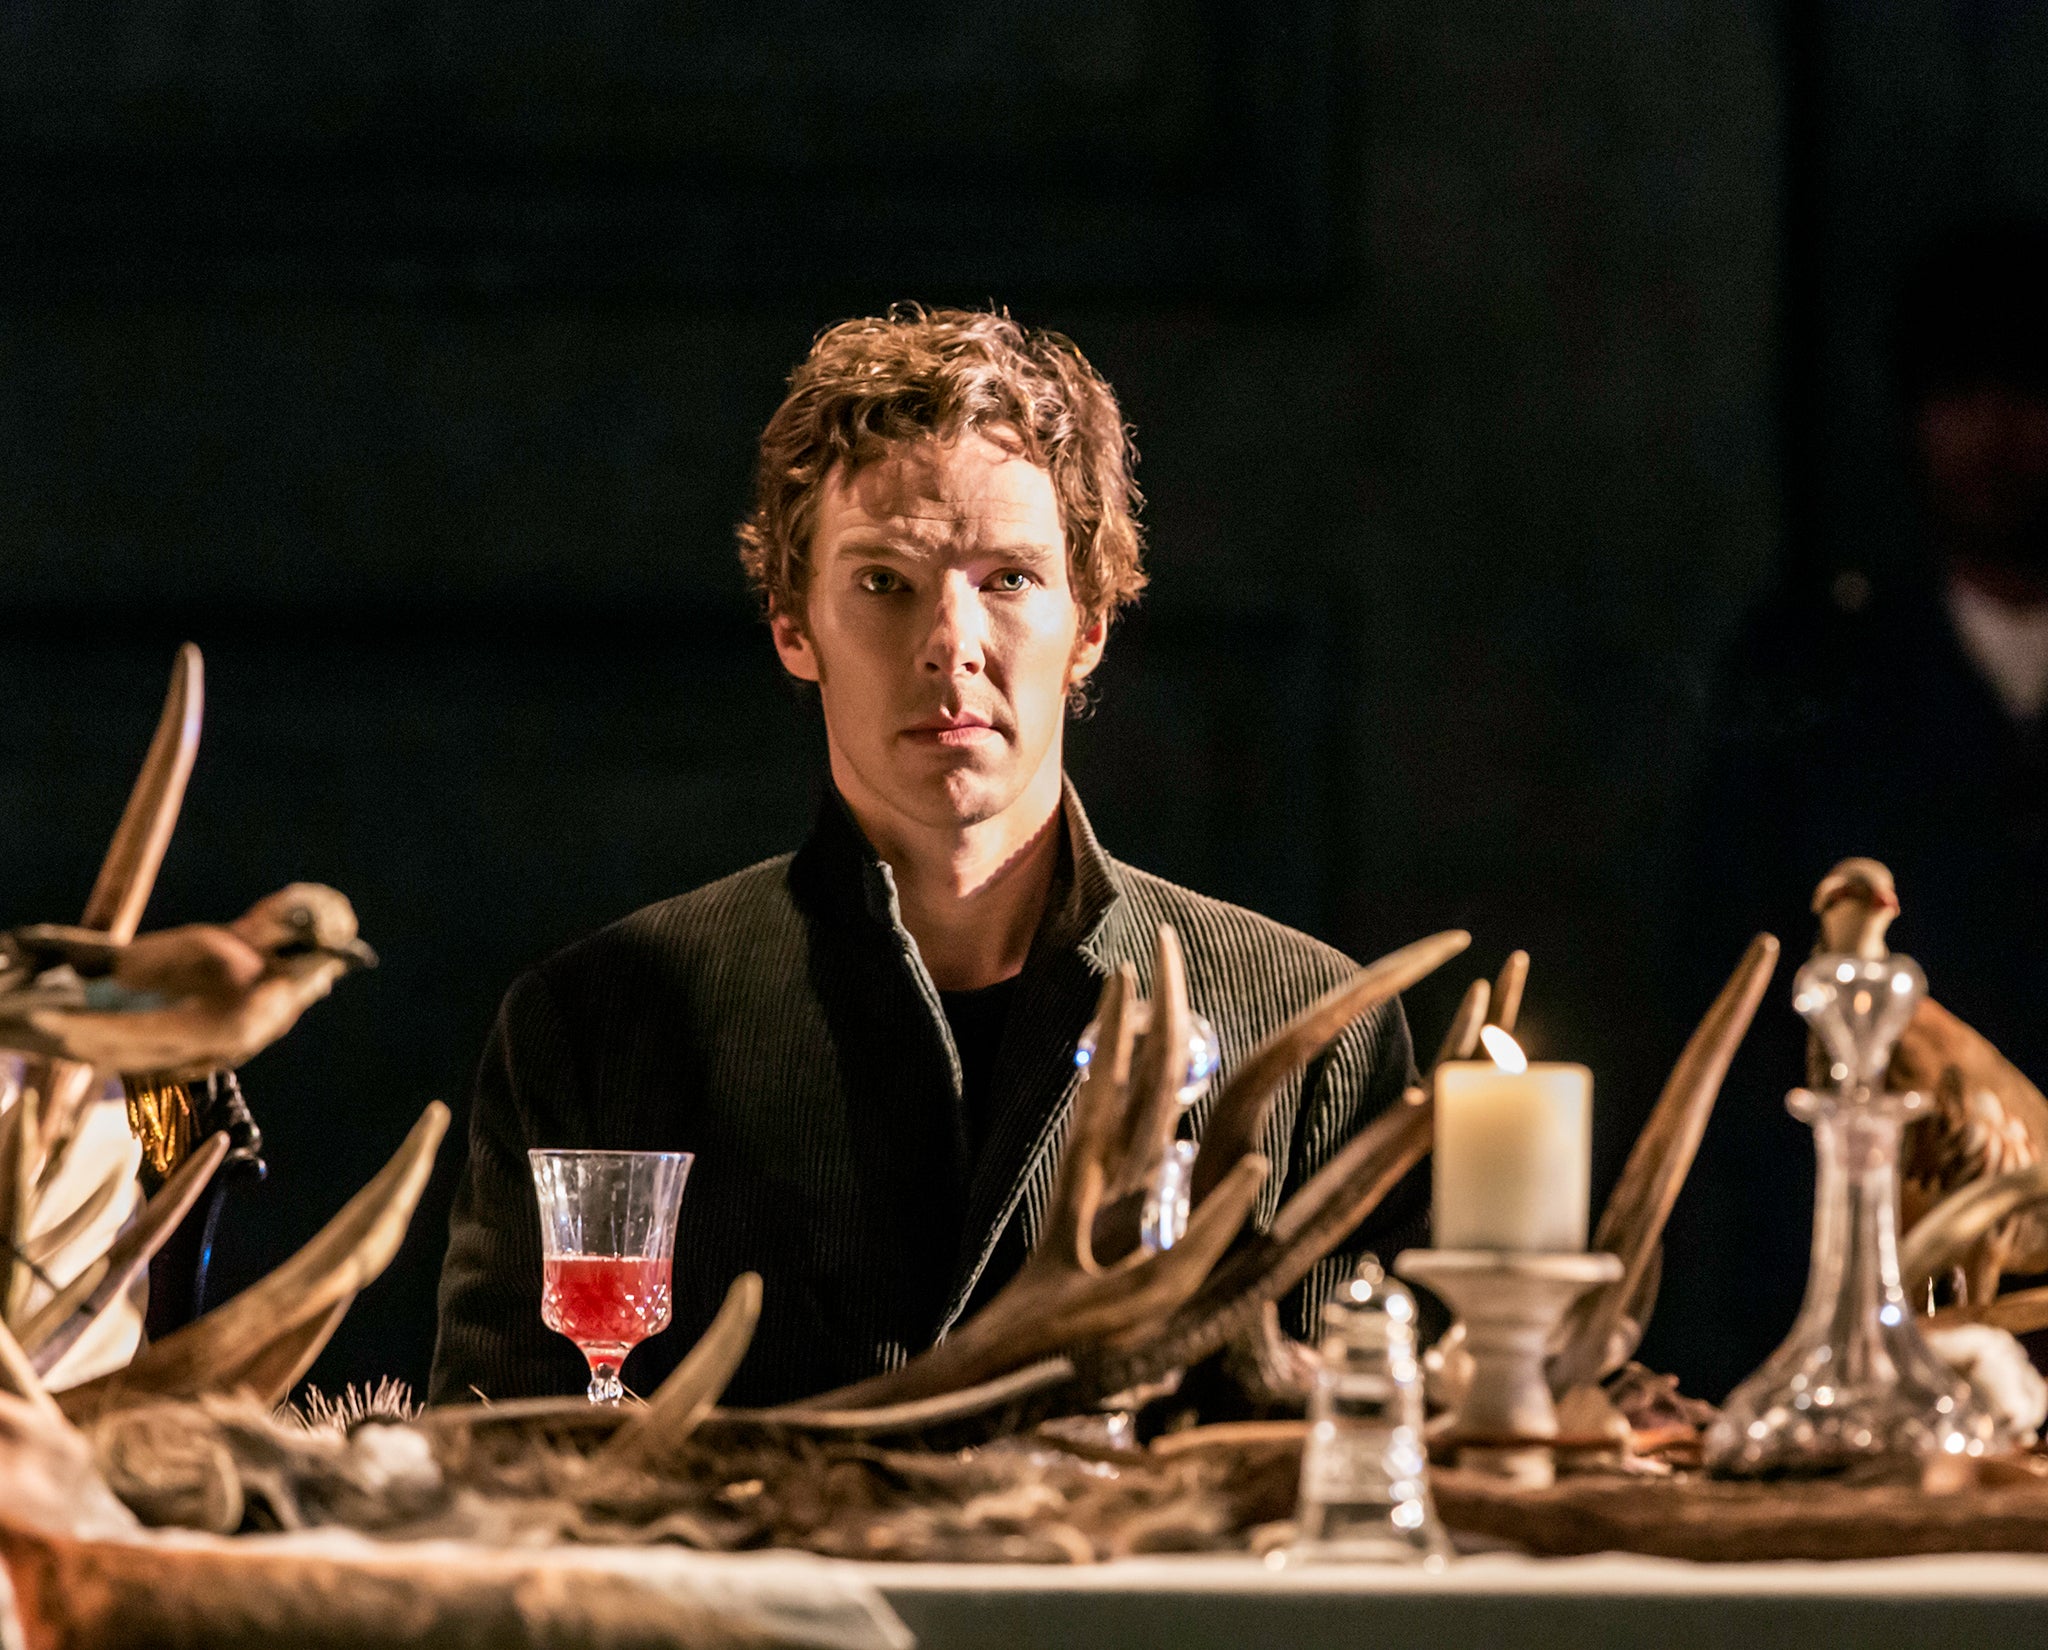 &#13;
Tickets to see Benedict Cumberbatch in Hamlet were hard to come by&#13;